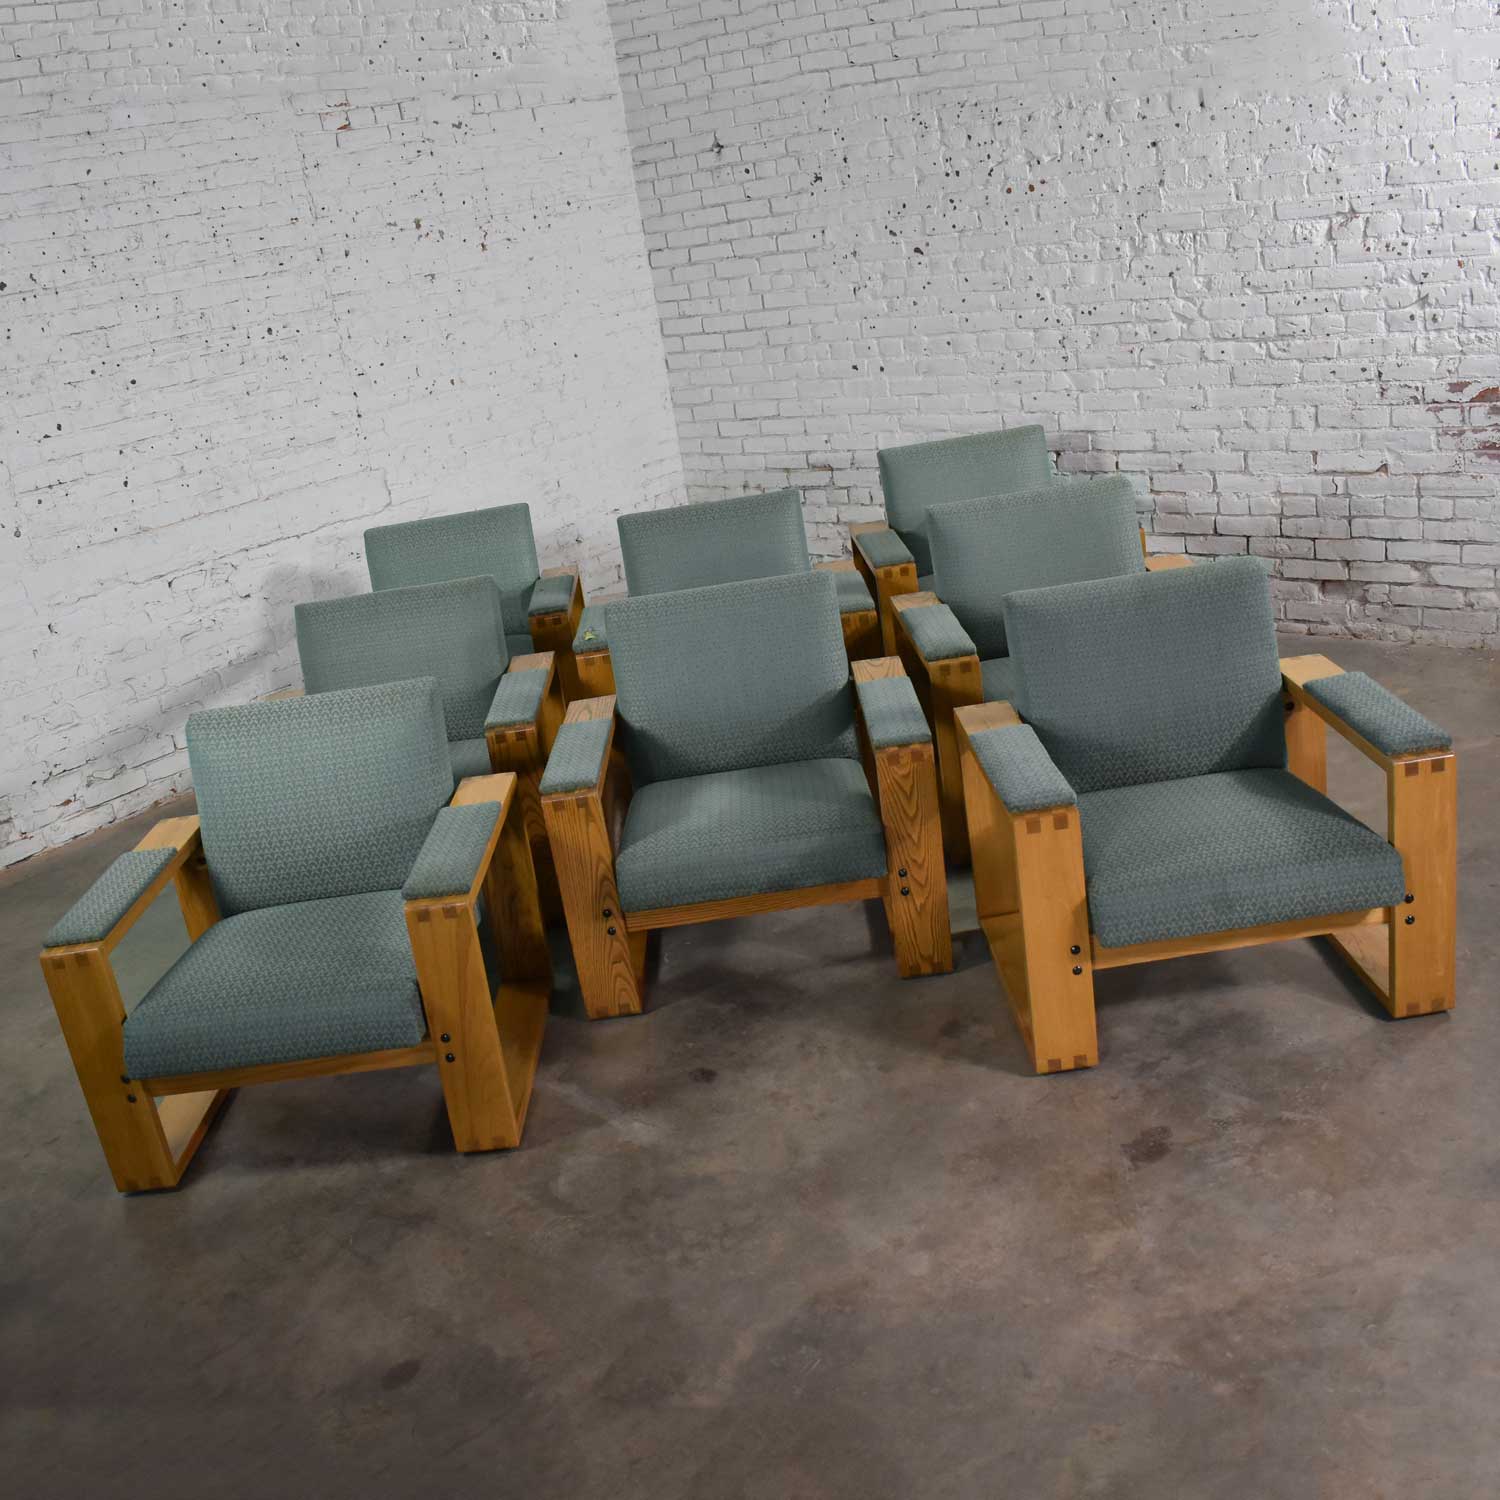 Modern Open Frame Club Chair with Floating Seat and Back in Oak and Fabric 8 Available